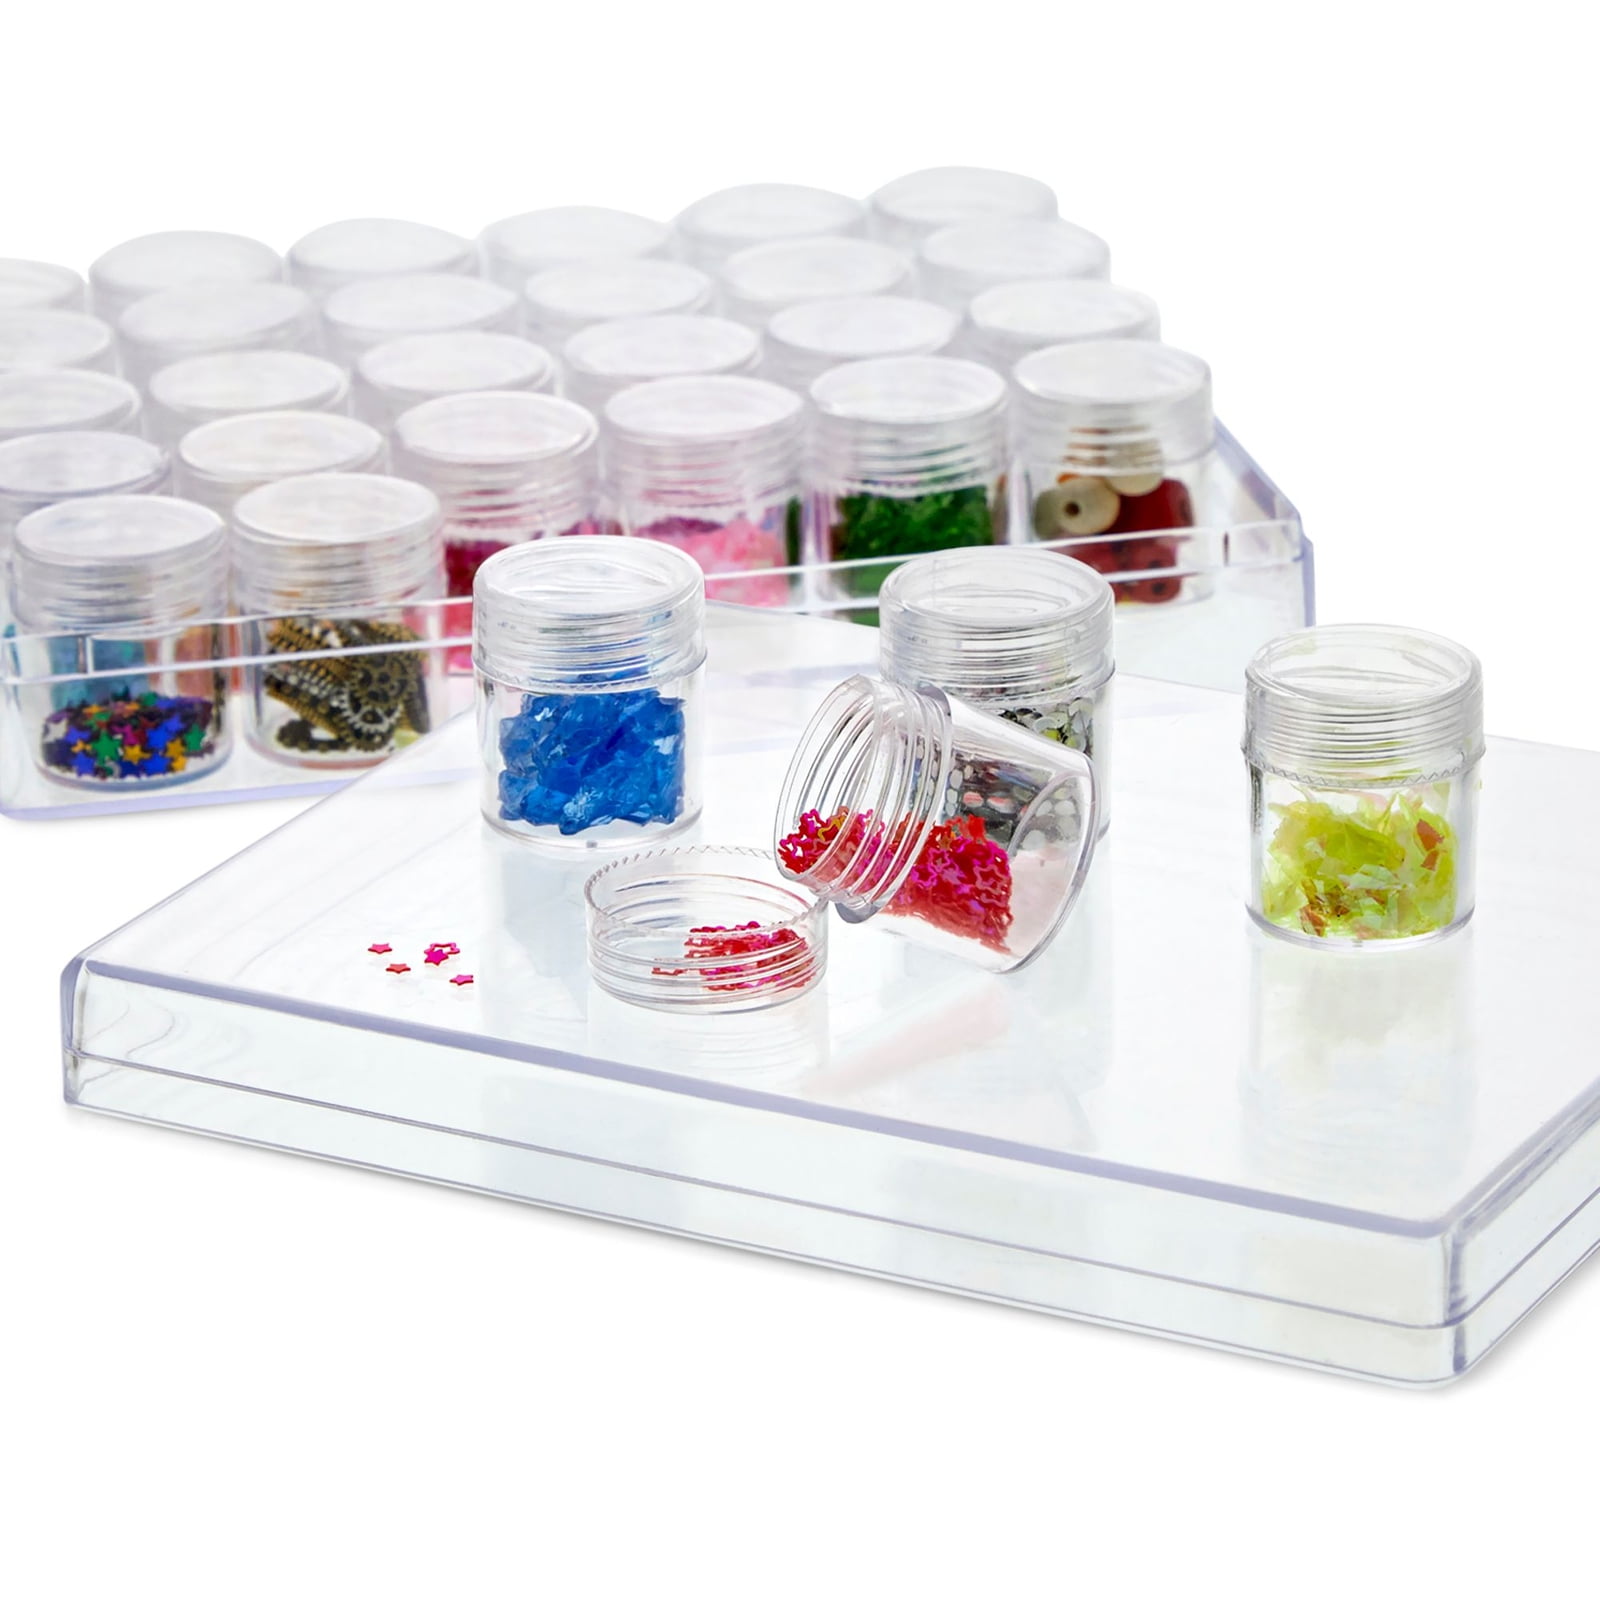  Craft Mates Bead Organizer And Plastic Containers Craft &  Sewing Supplies Storage, 4 Locking Compartments